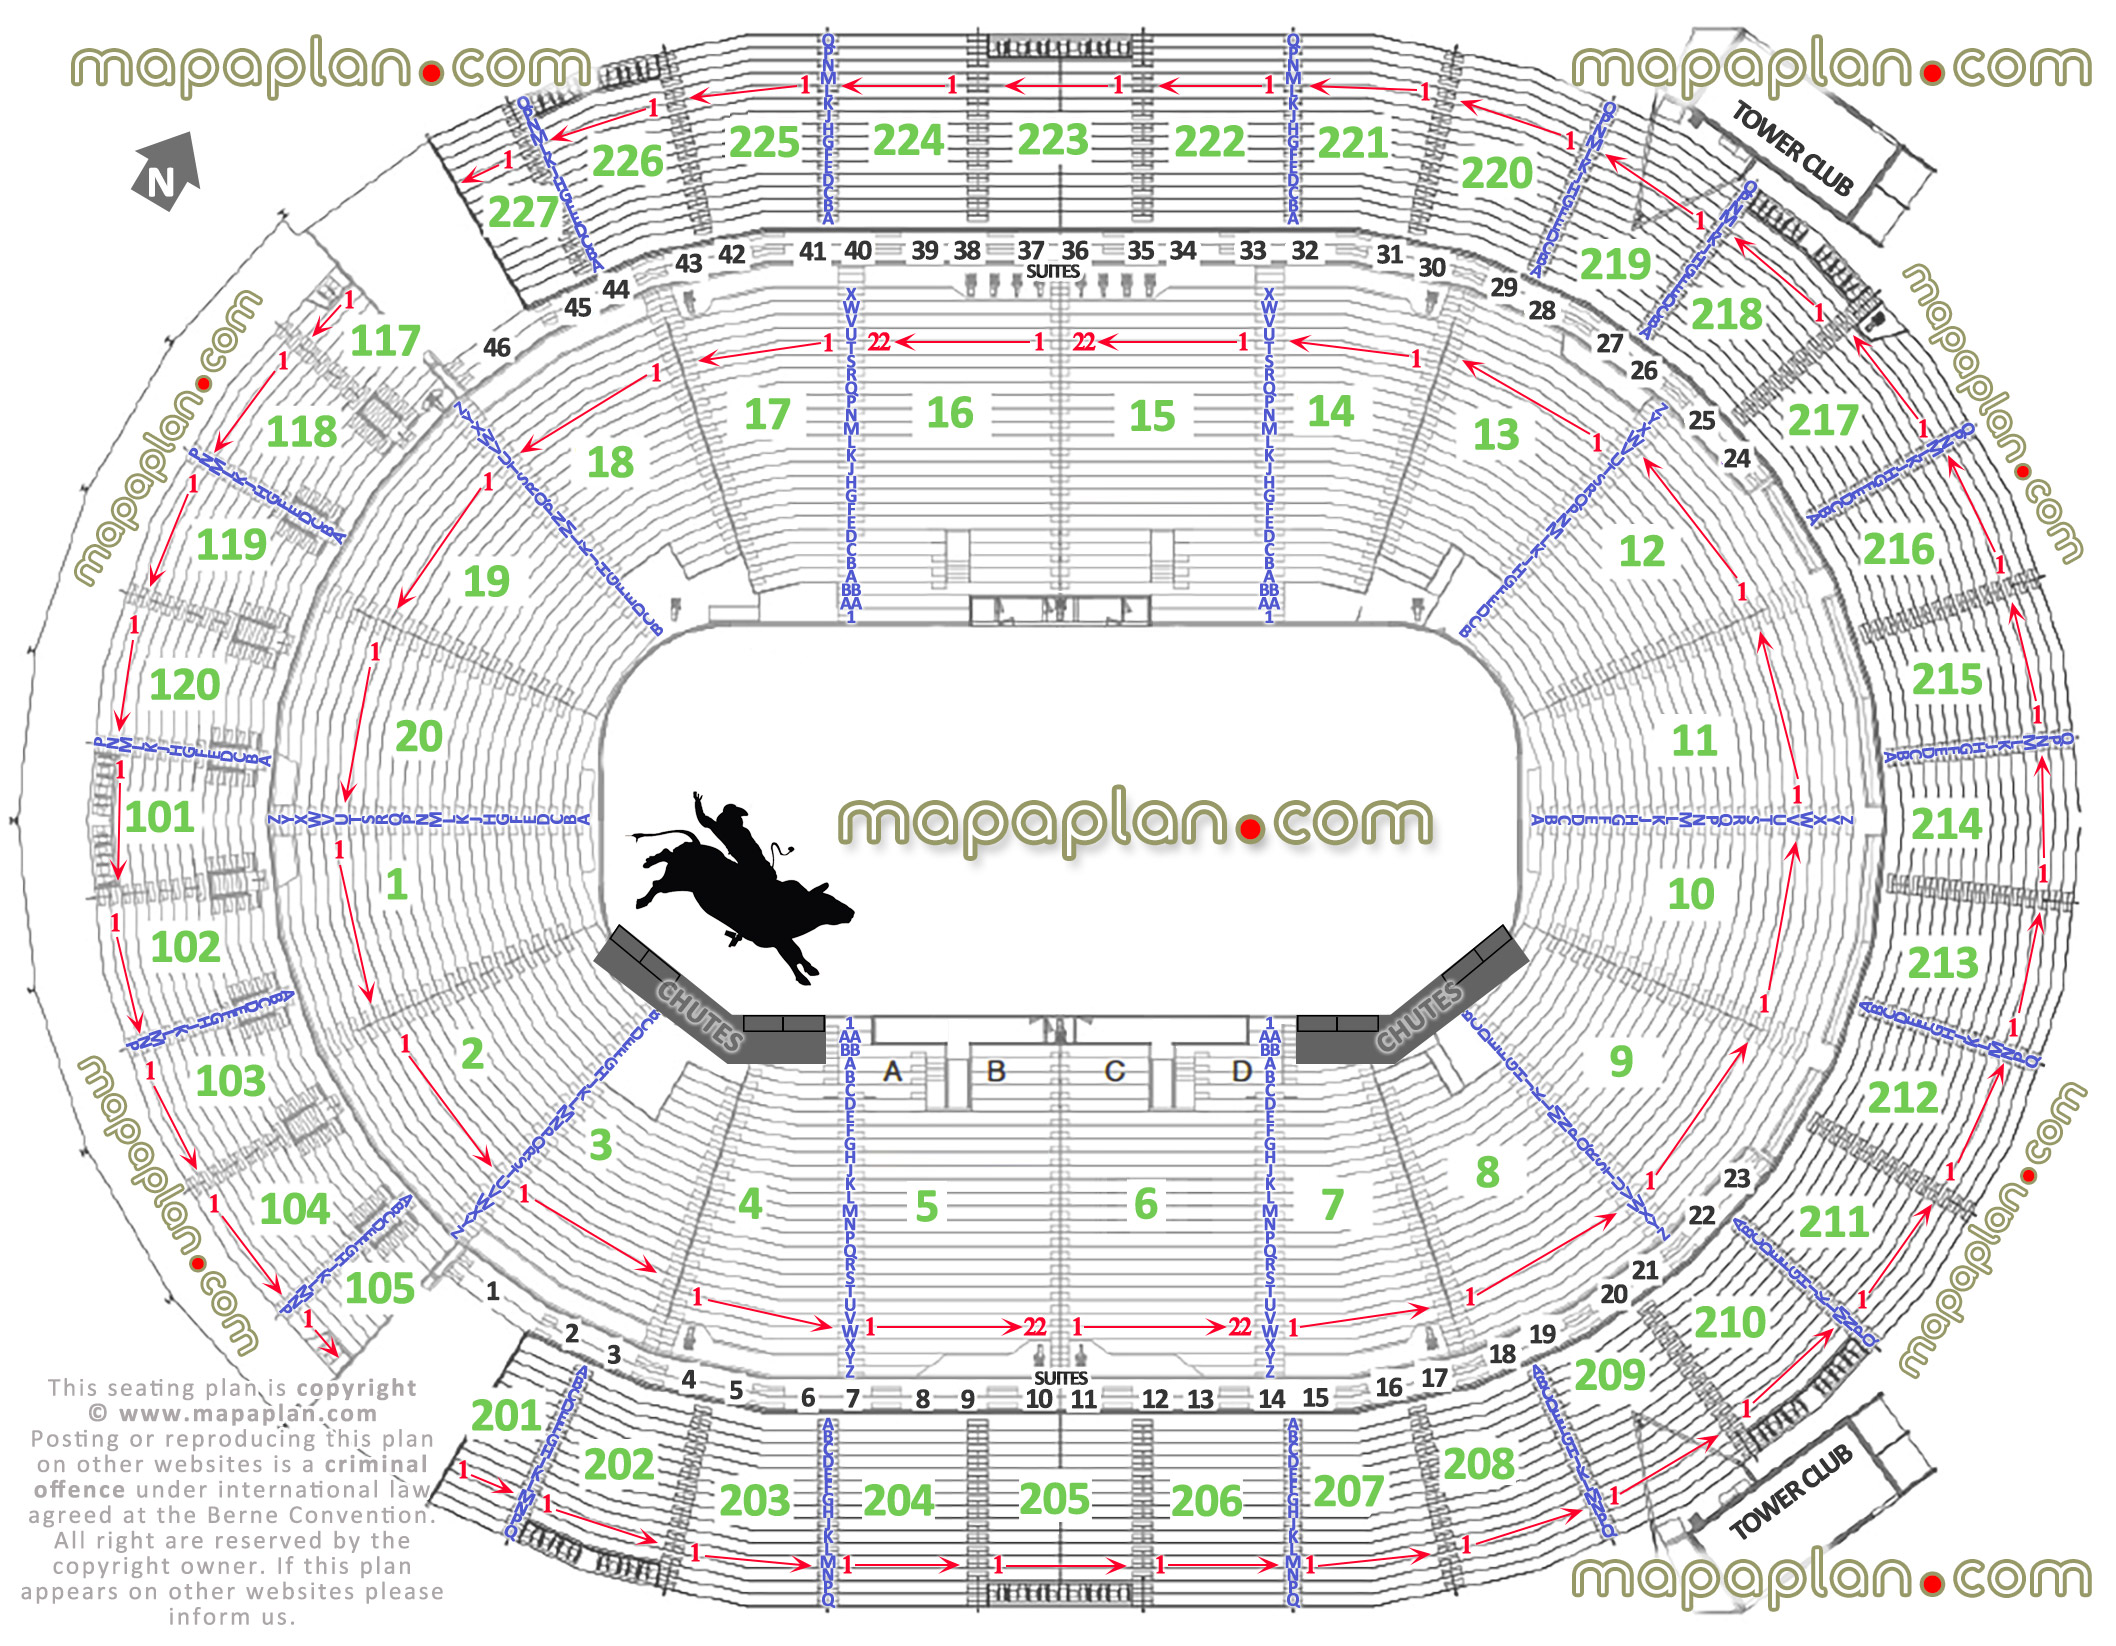 pbr rodeo show professional bull riders seating diagram individual find seat locator seats row best seats rows numbered lower premium executive suite upper bowl level sections 101 102 103 104 105 117 118 119 120 Las Vegas New T-Mobile Arena MGM-AEG seating chart